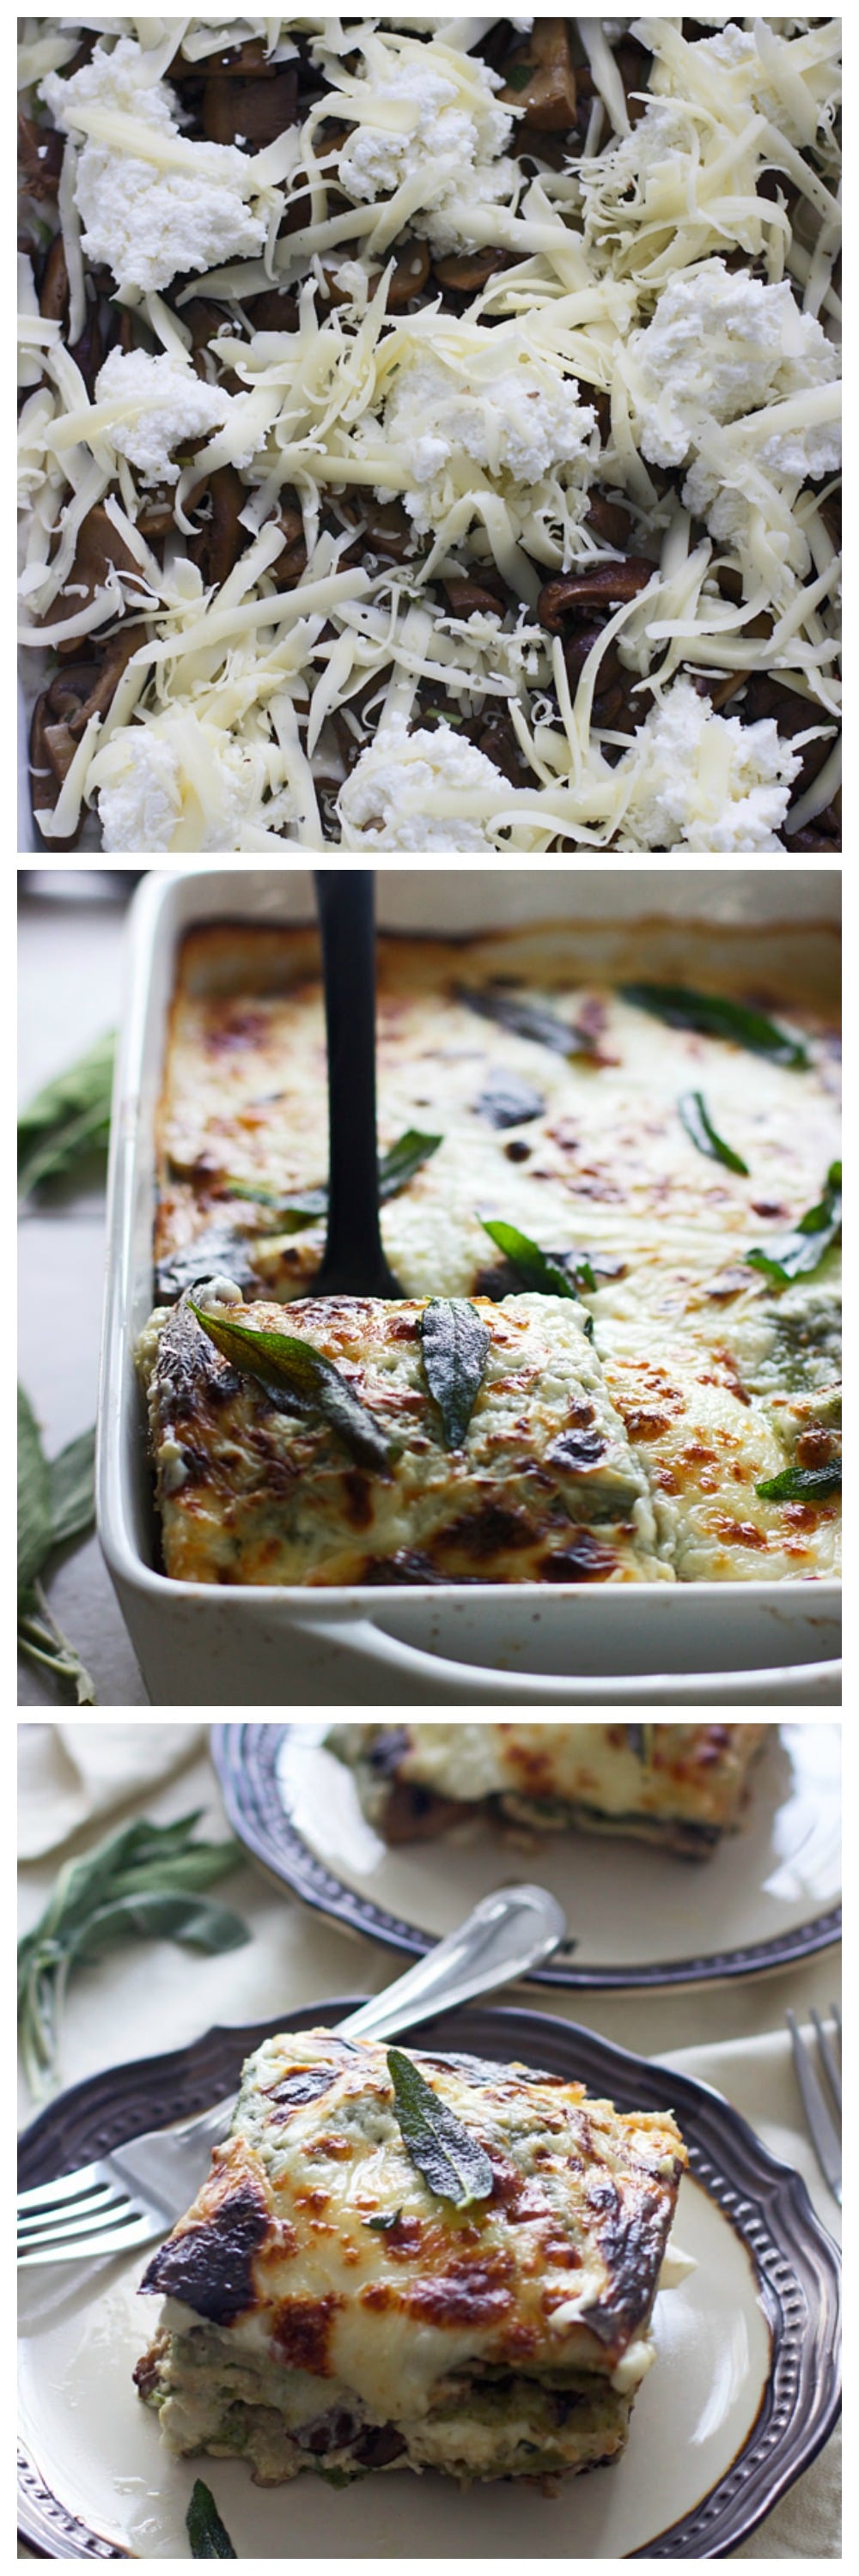 Triple Mushroom Lasagna with Ricotta, Sage and Fontina - Literally the most delicious lasagna you'll ever taste...